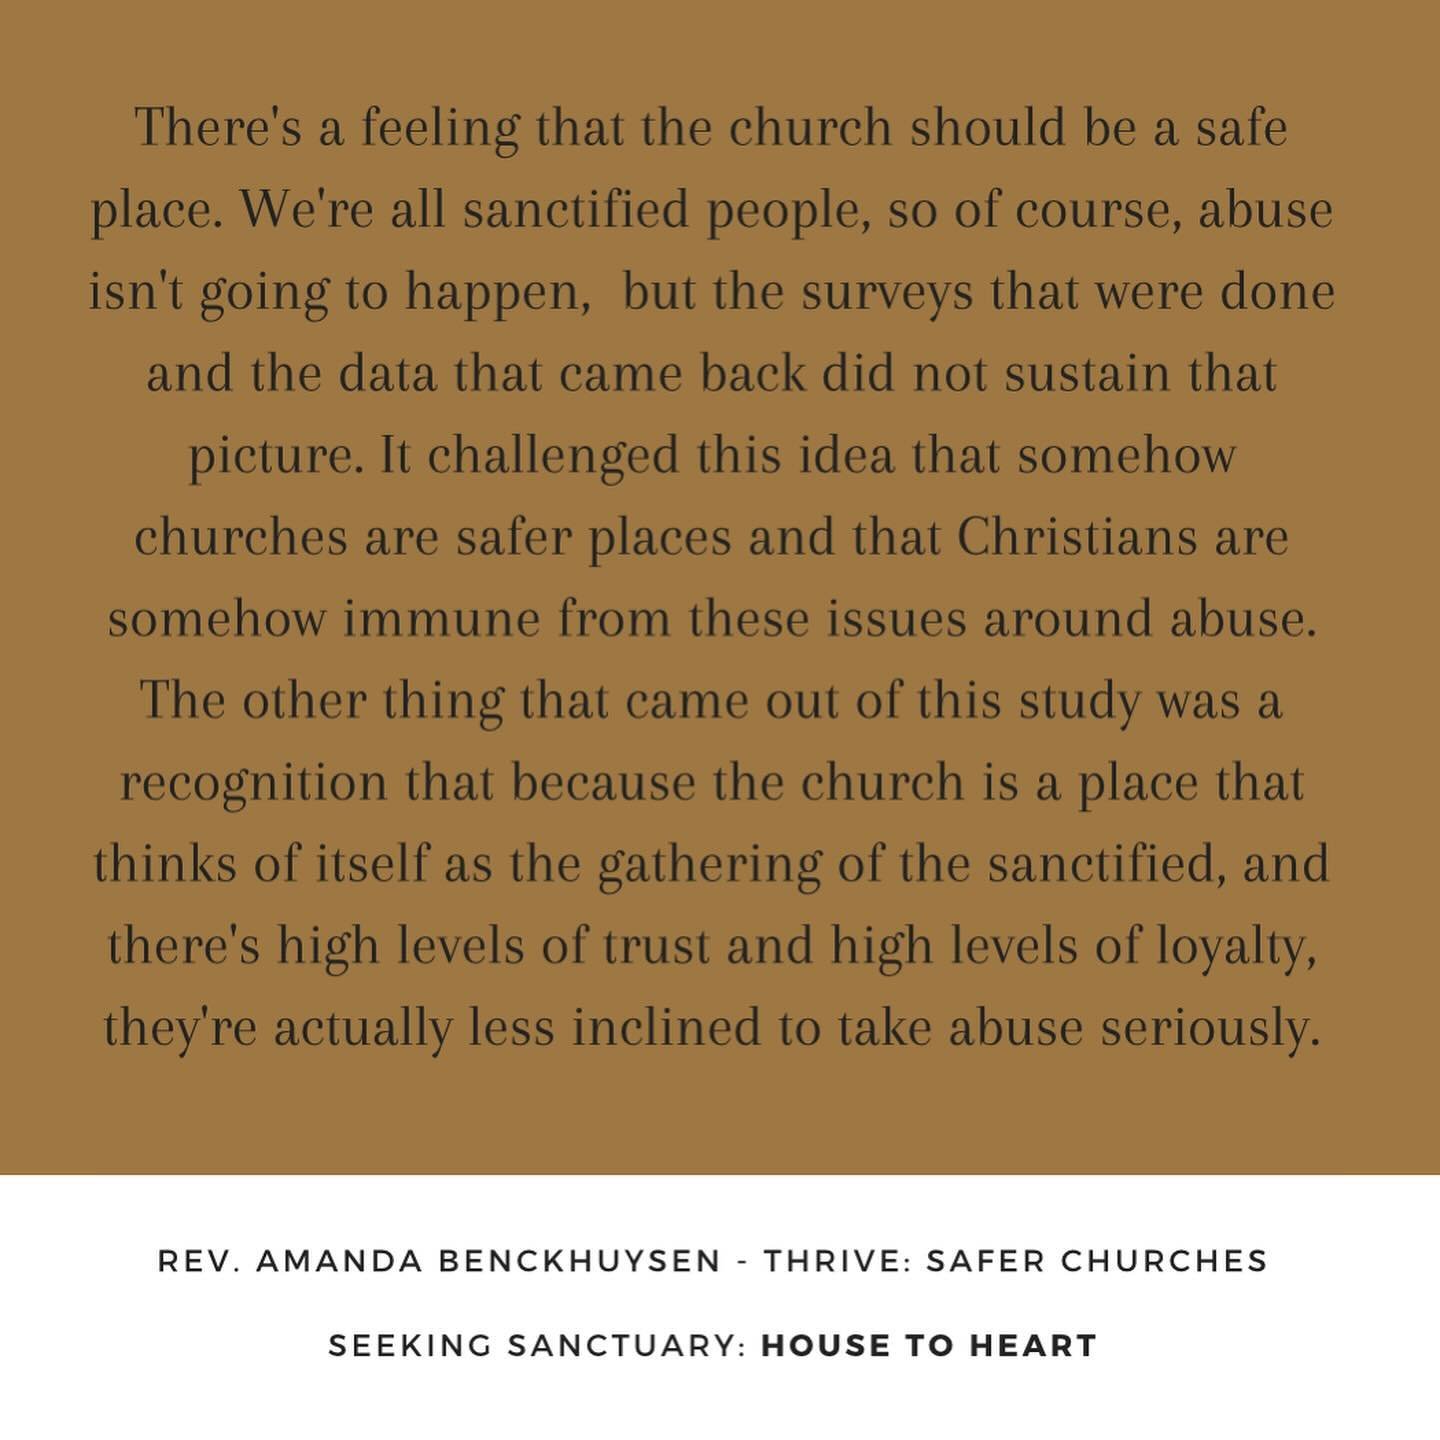 NEW PODCAST EPISODE ALERT 🔔 Tune in to our latest episode of Seeking Sanctuary: House to Heart to hear from Reverand Amanda Benckhuysen, a team lead for Thrive: Safer Churches Ministry, about what a denomination wide response to abuse looks like and